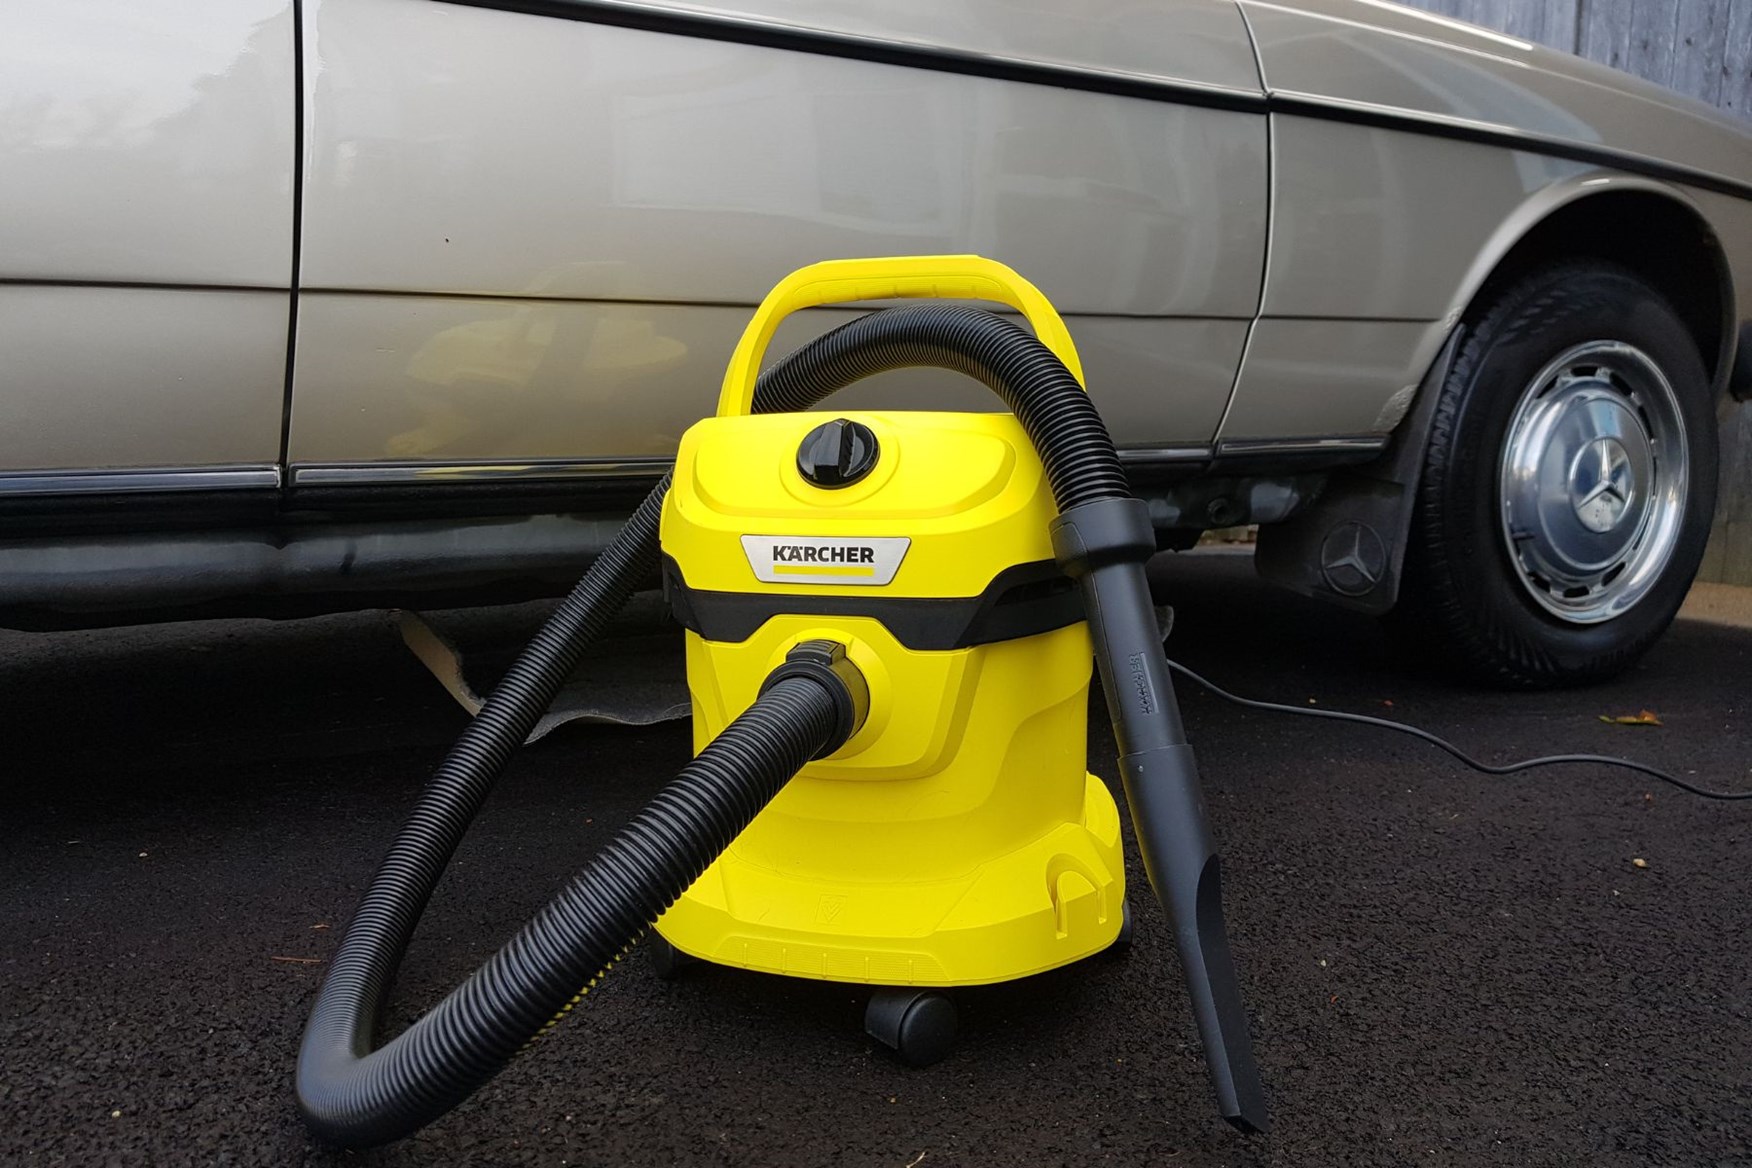 Karcher Wd 2 Wet And Dry Vacuum Cleaner - 1000w